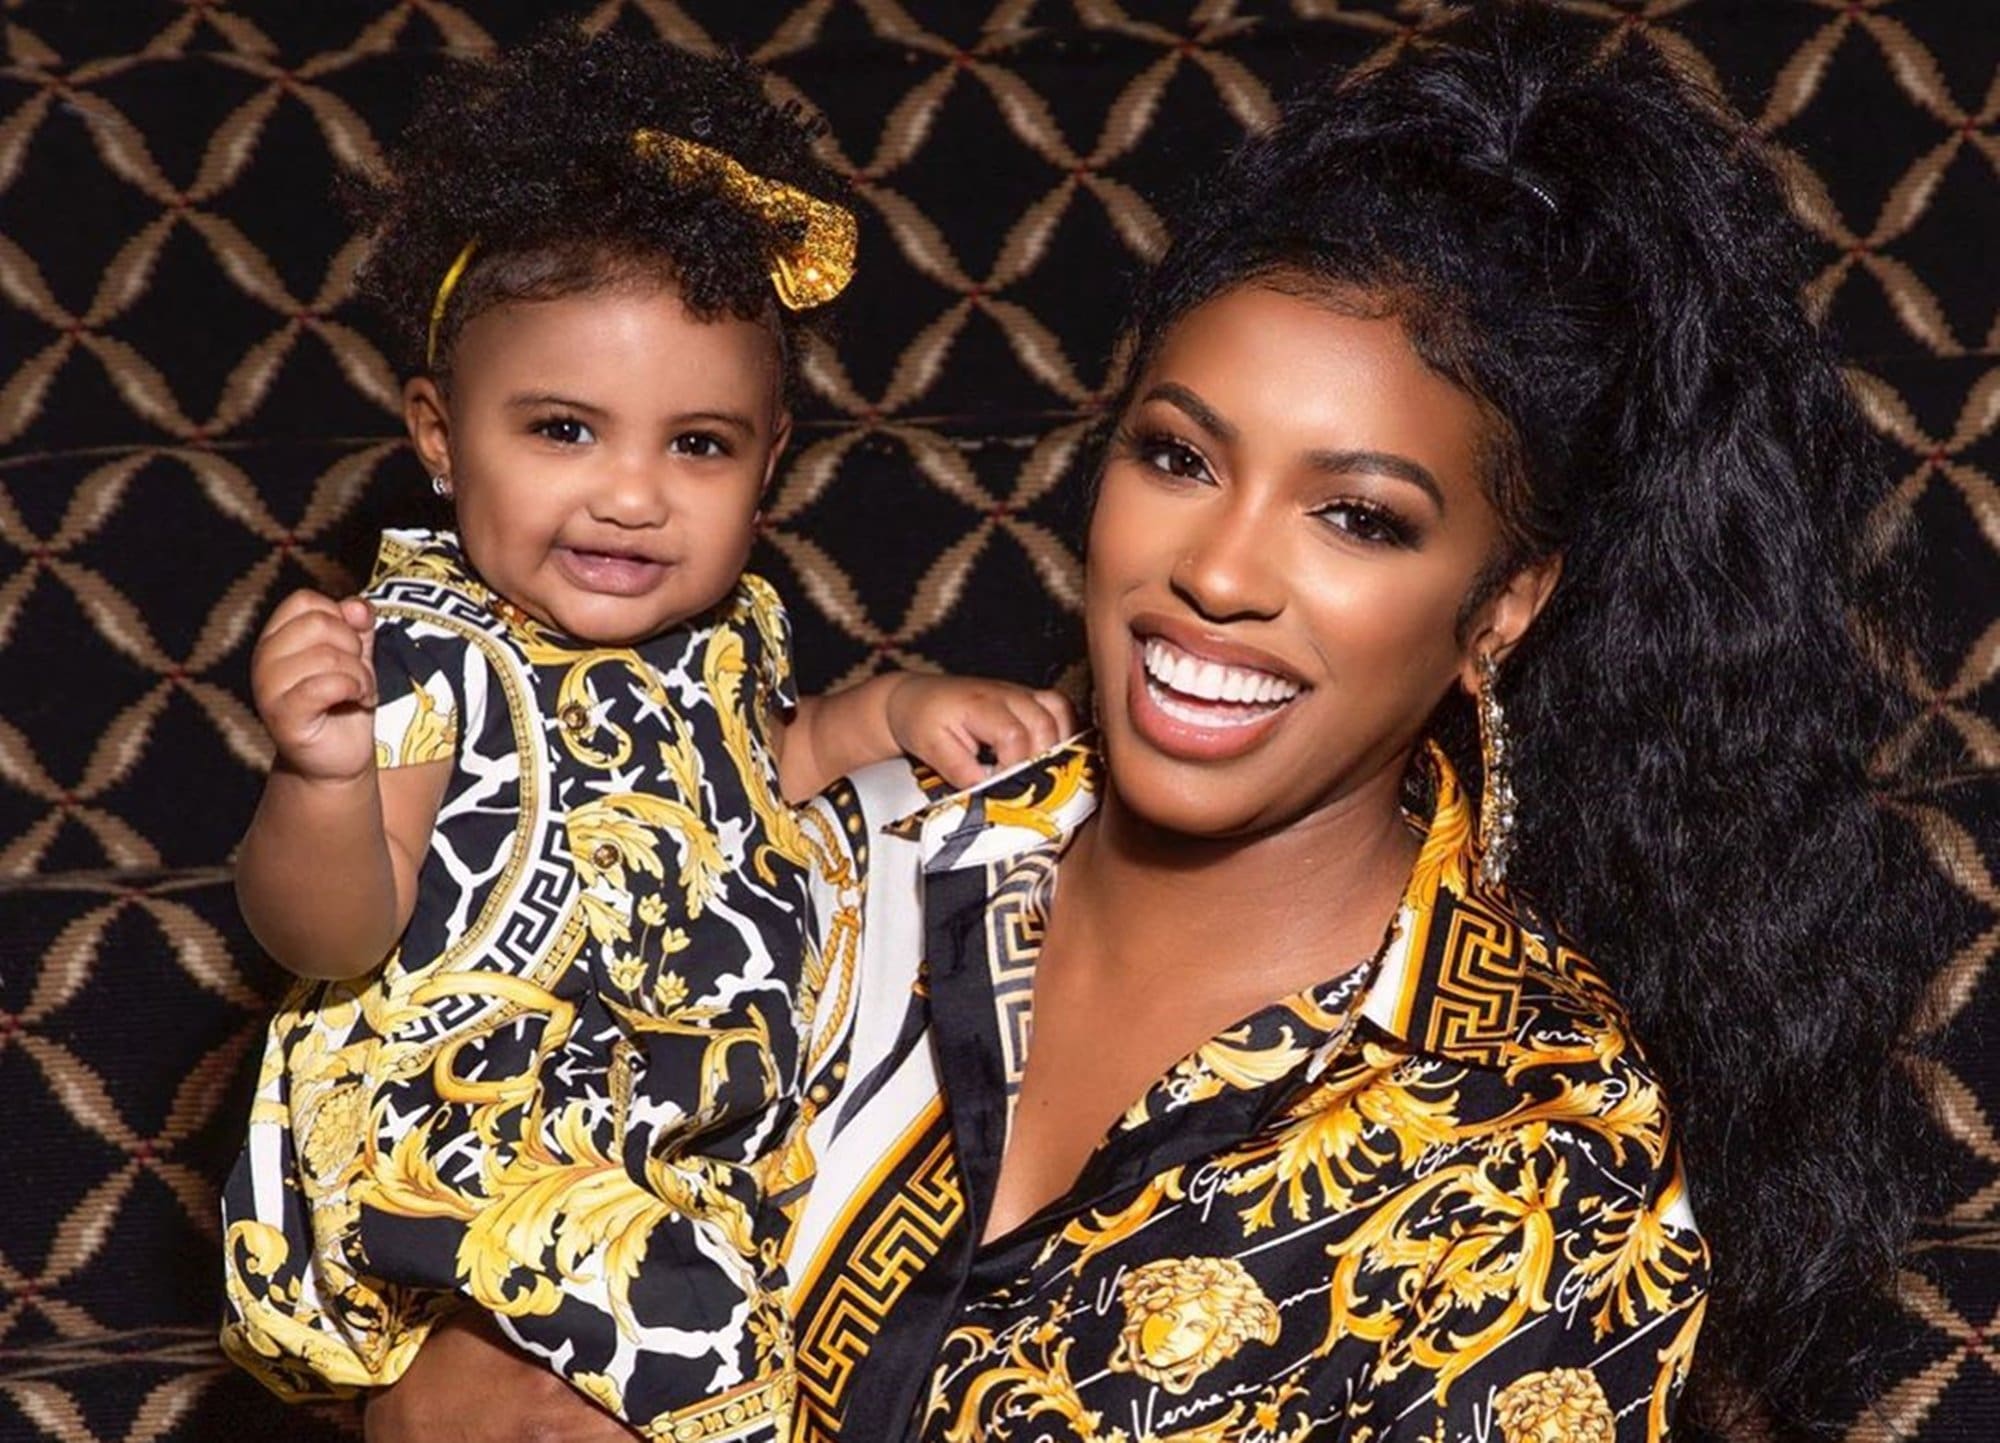 ”porsha-williams-daughter-pilar-jhena-is-a-fendi-baby-in-this-outfit-and-fans-cannot-get-enough-of-her”